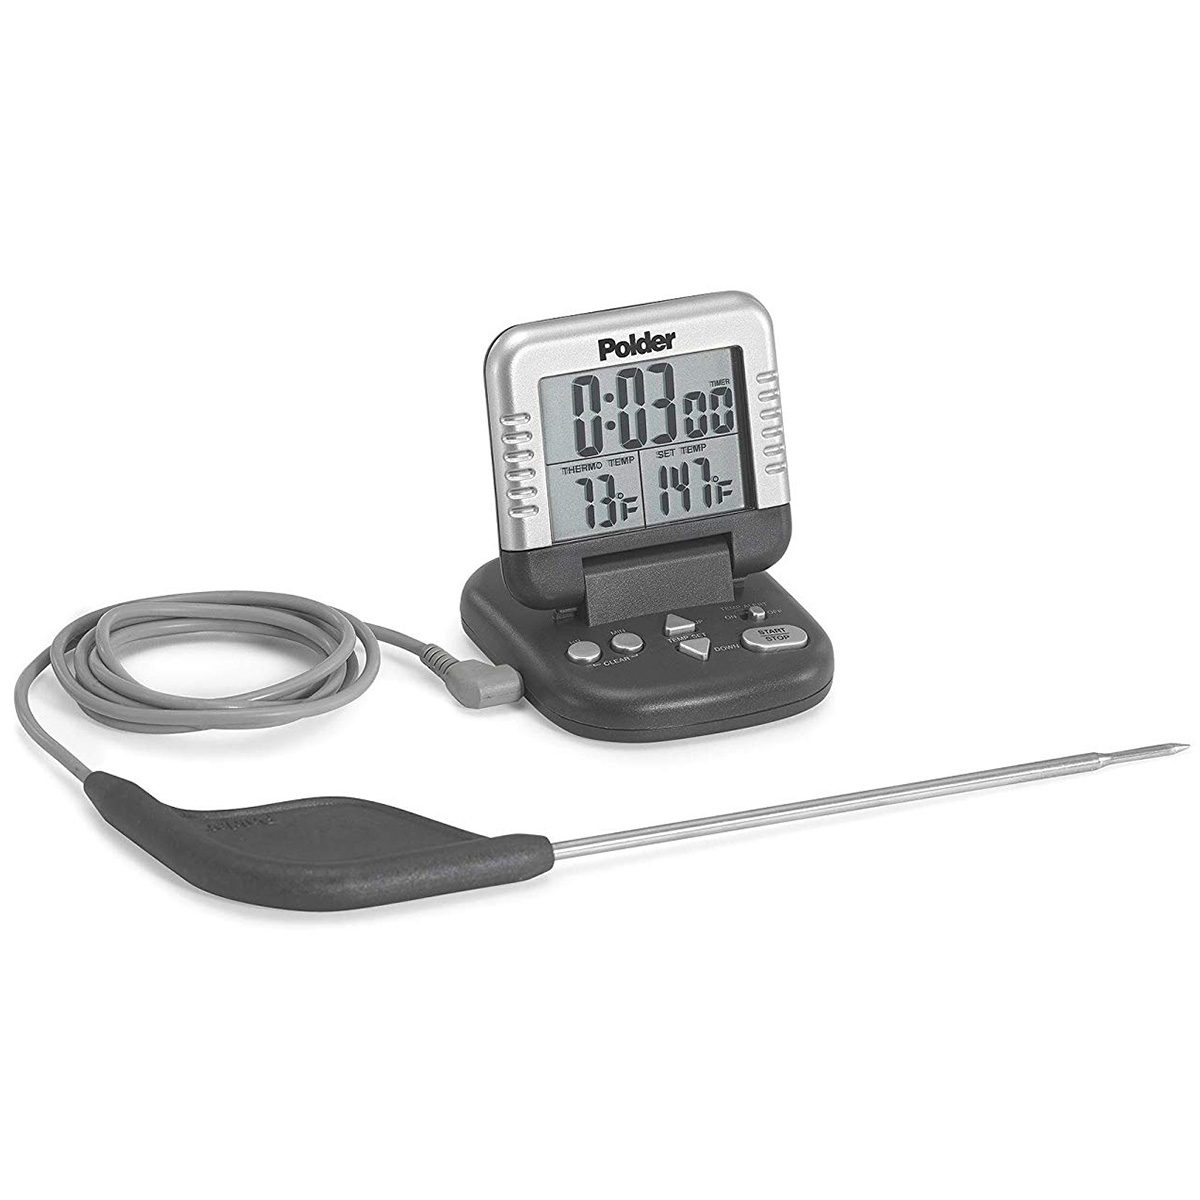 Polder Digital In-Oven Thermometer / Timer